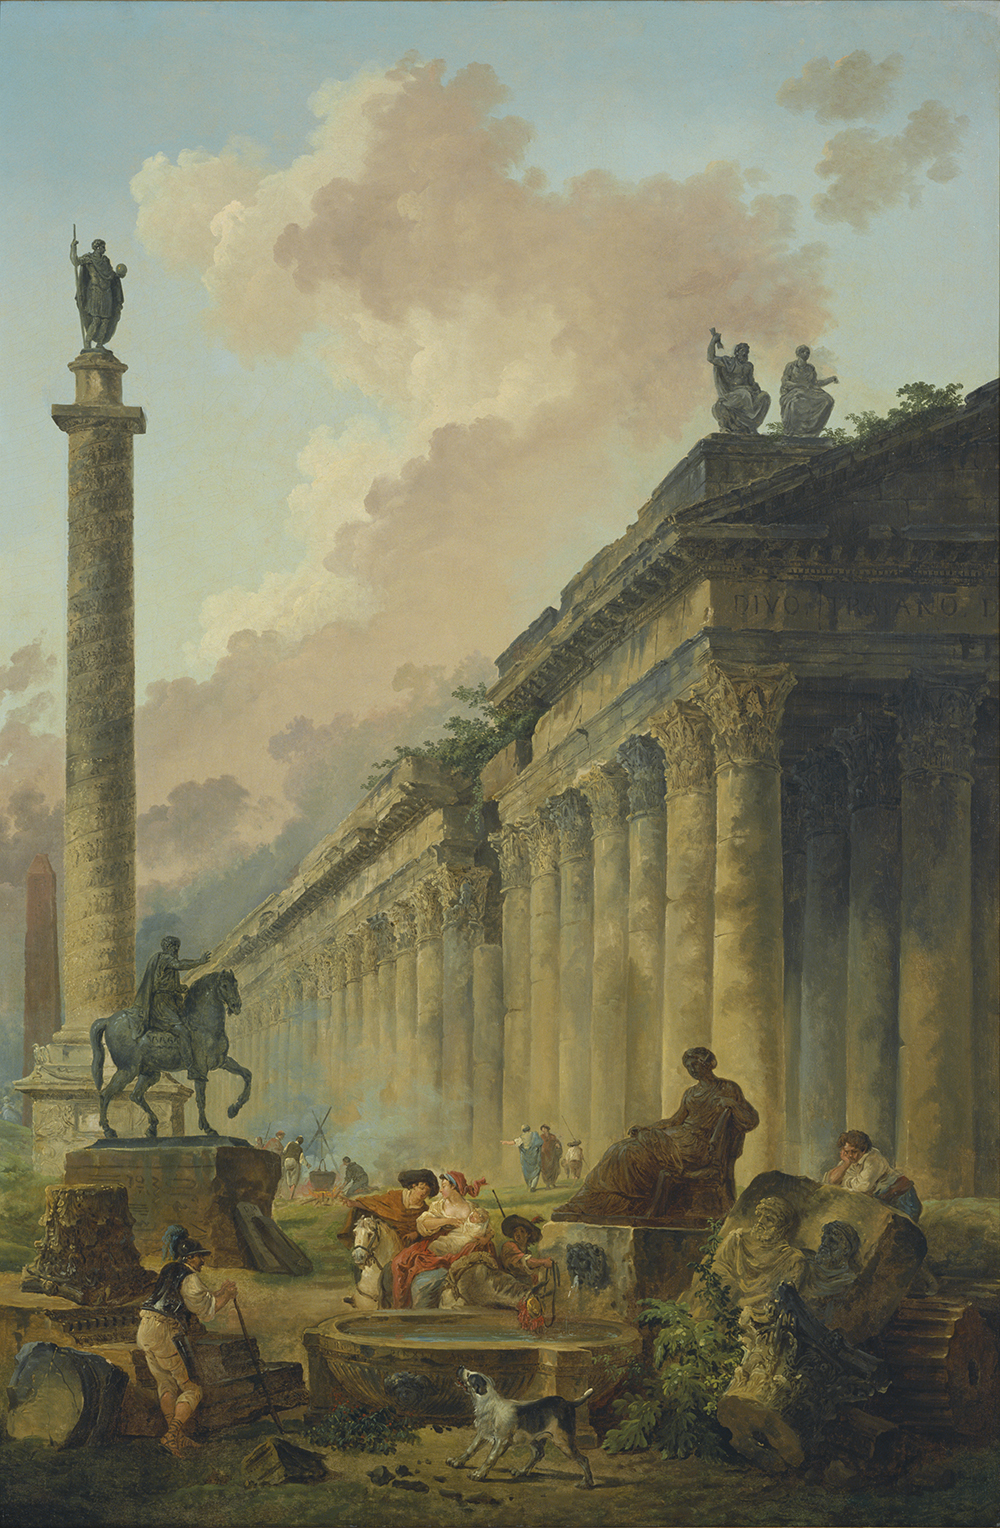 photo:Hubert Robert
Imaginary View of Rome with Equestrian Statue of Marcus Aurelius, The Column of Trajan and a Temple